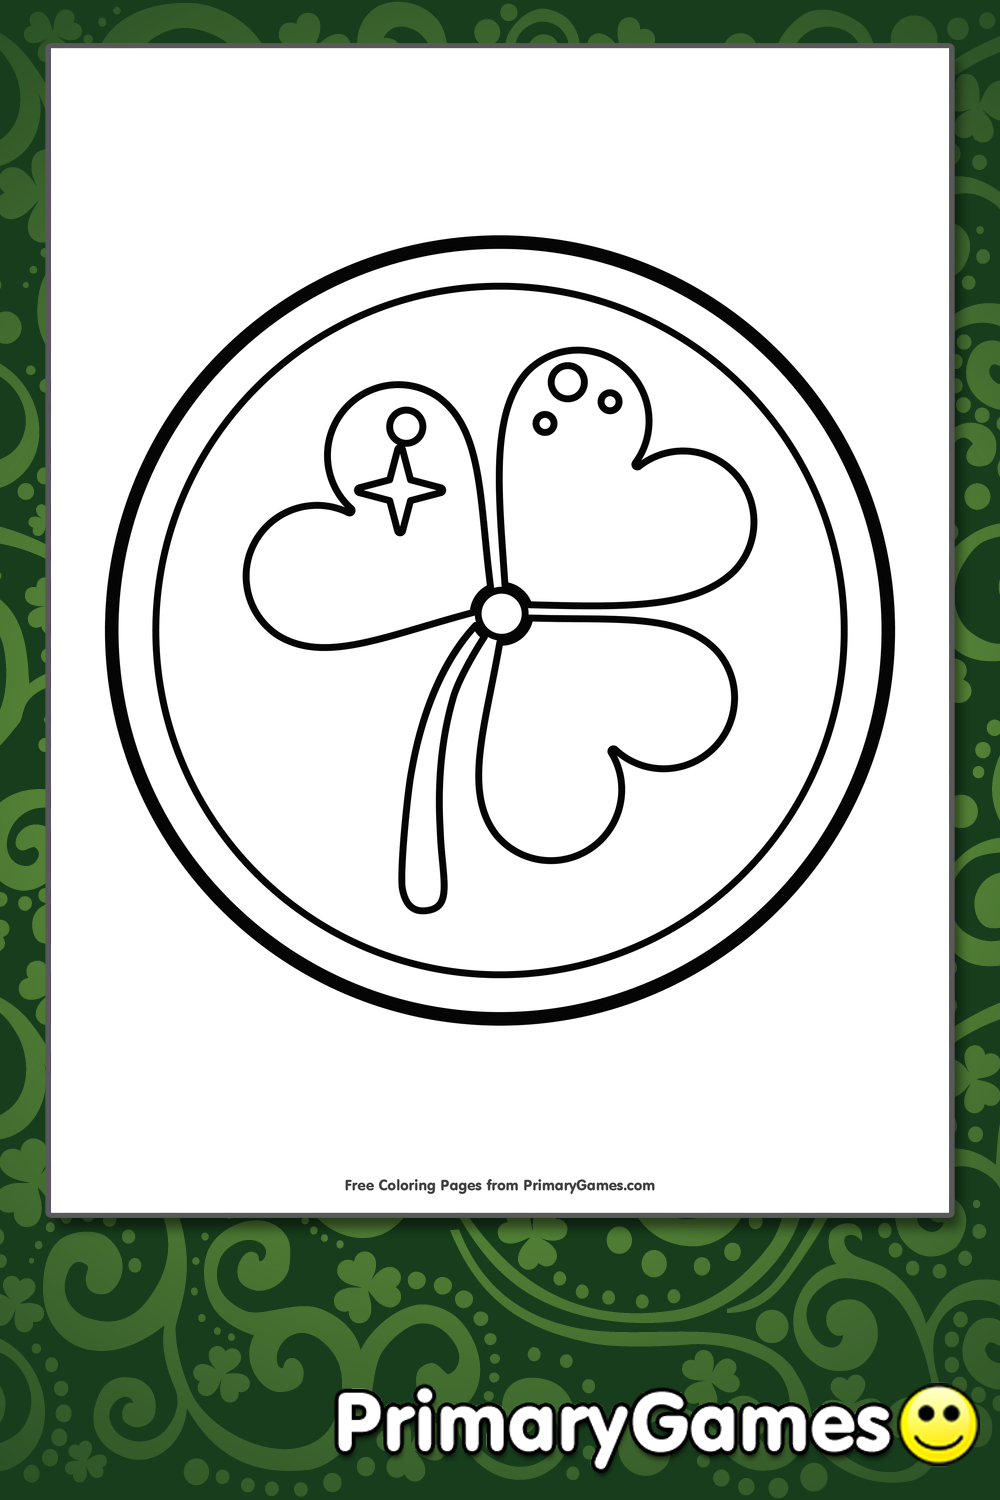 Shamrock gold coin coloring page â free printable pdf from